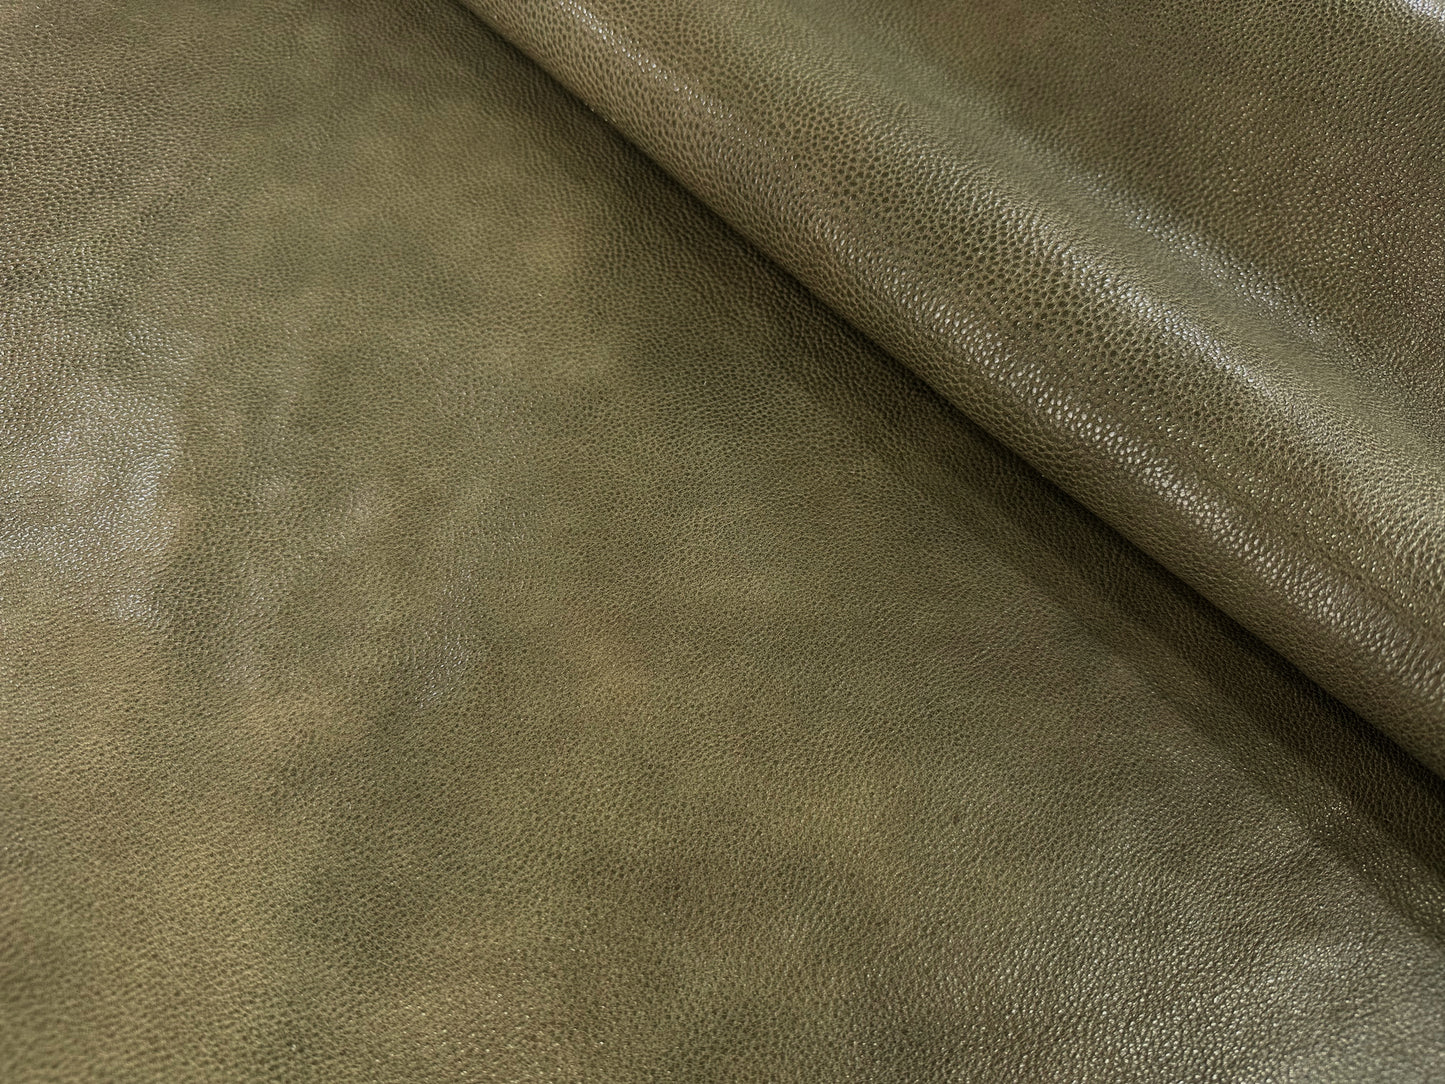 MW Natural Tanned Shrink Leather #9 Olive